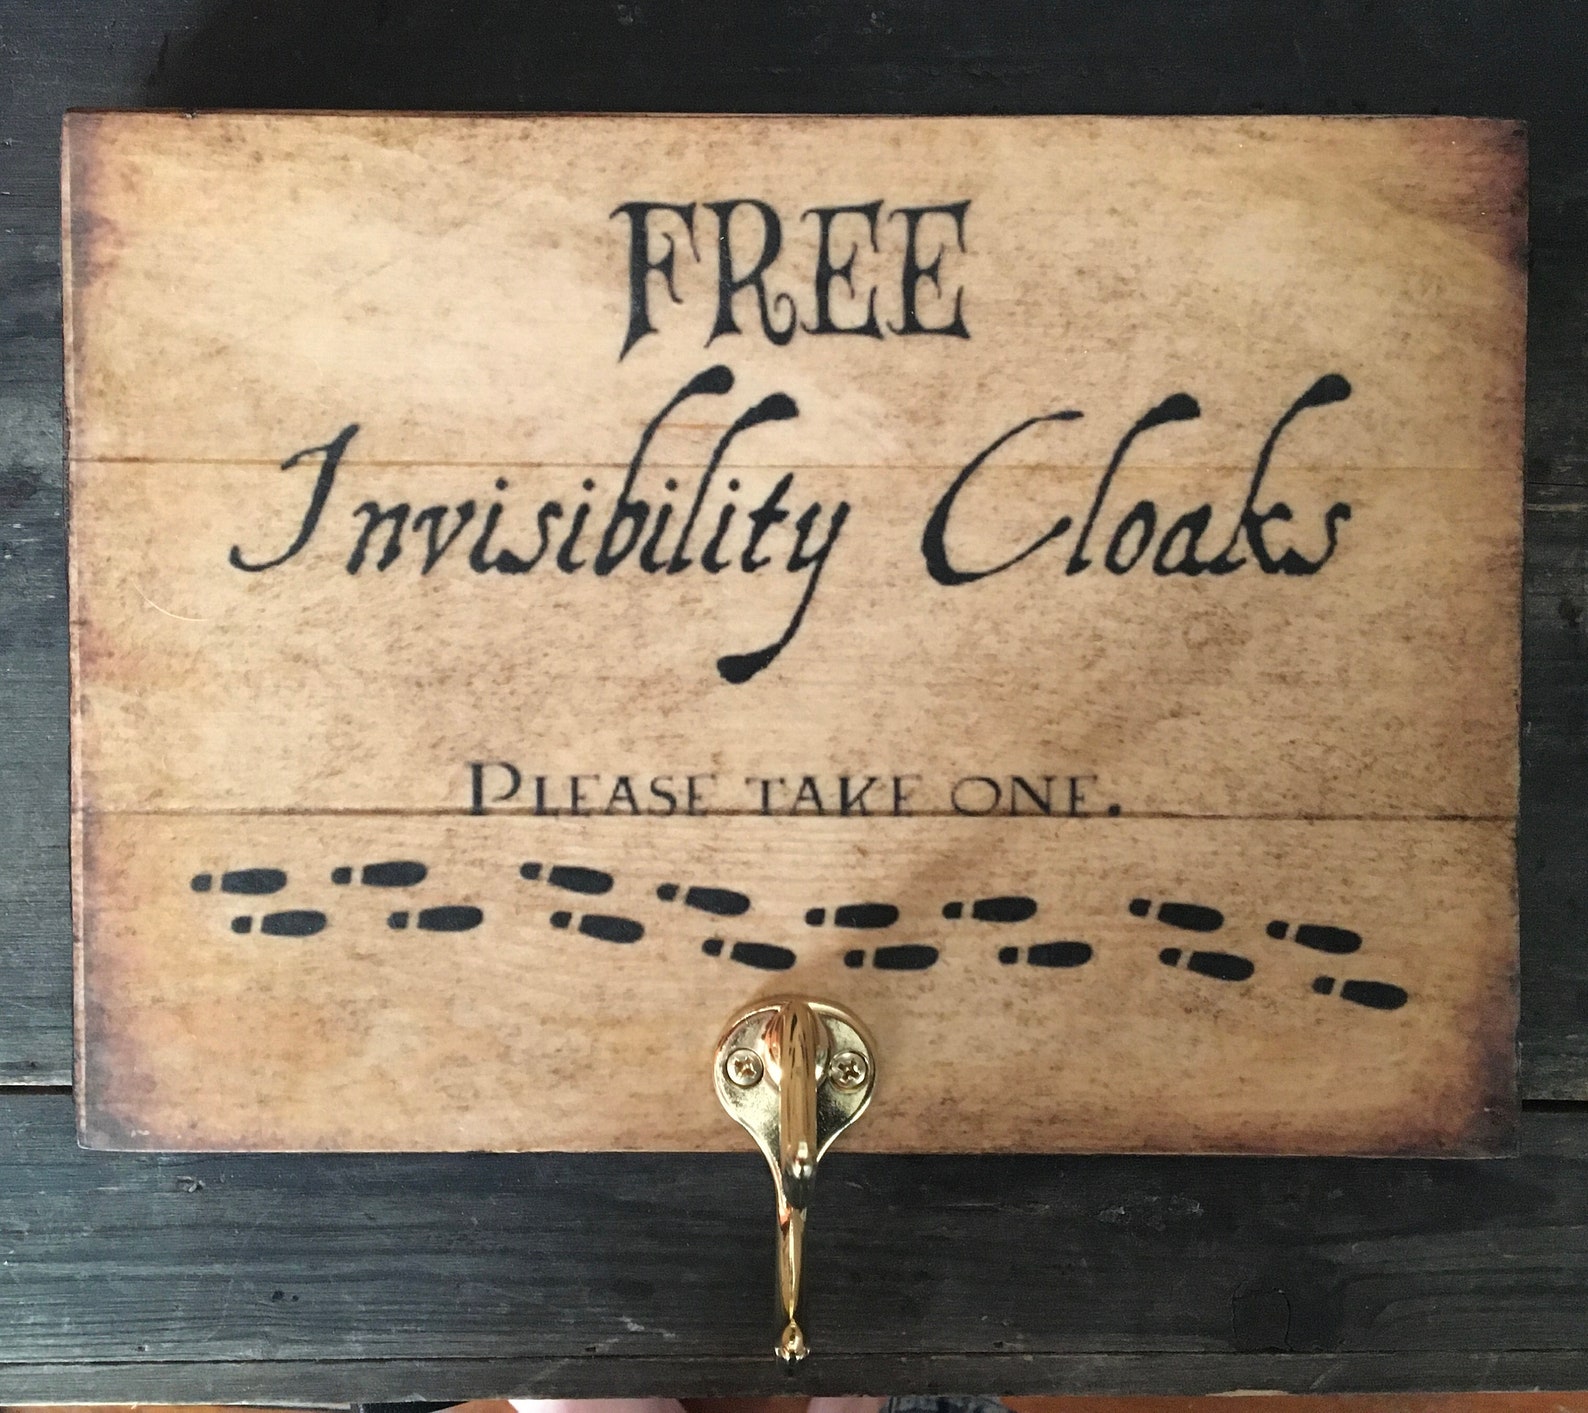 free-invisibility-cloaks-rustic-distressed-sign-etsy